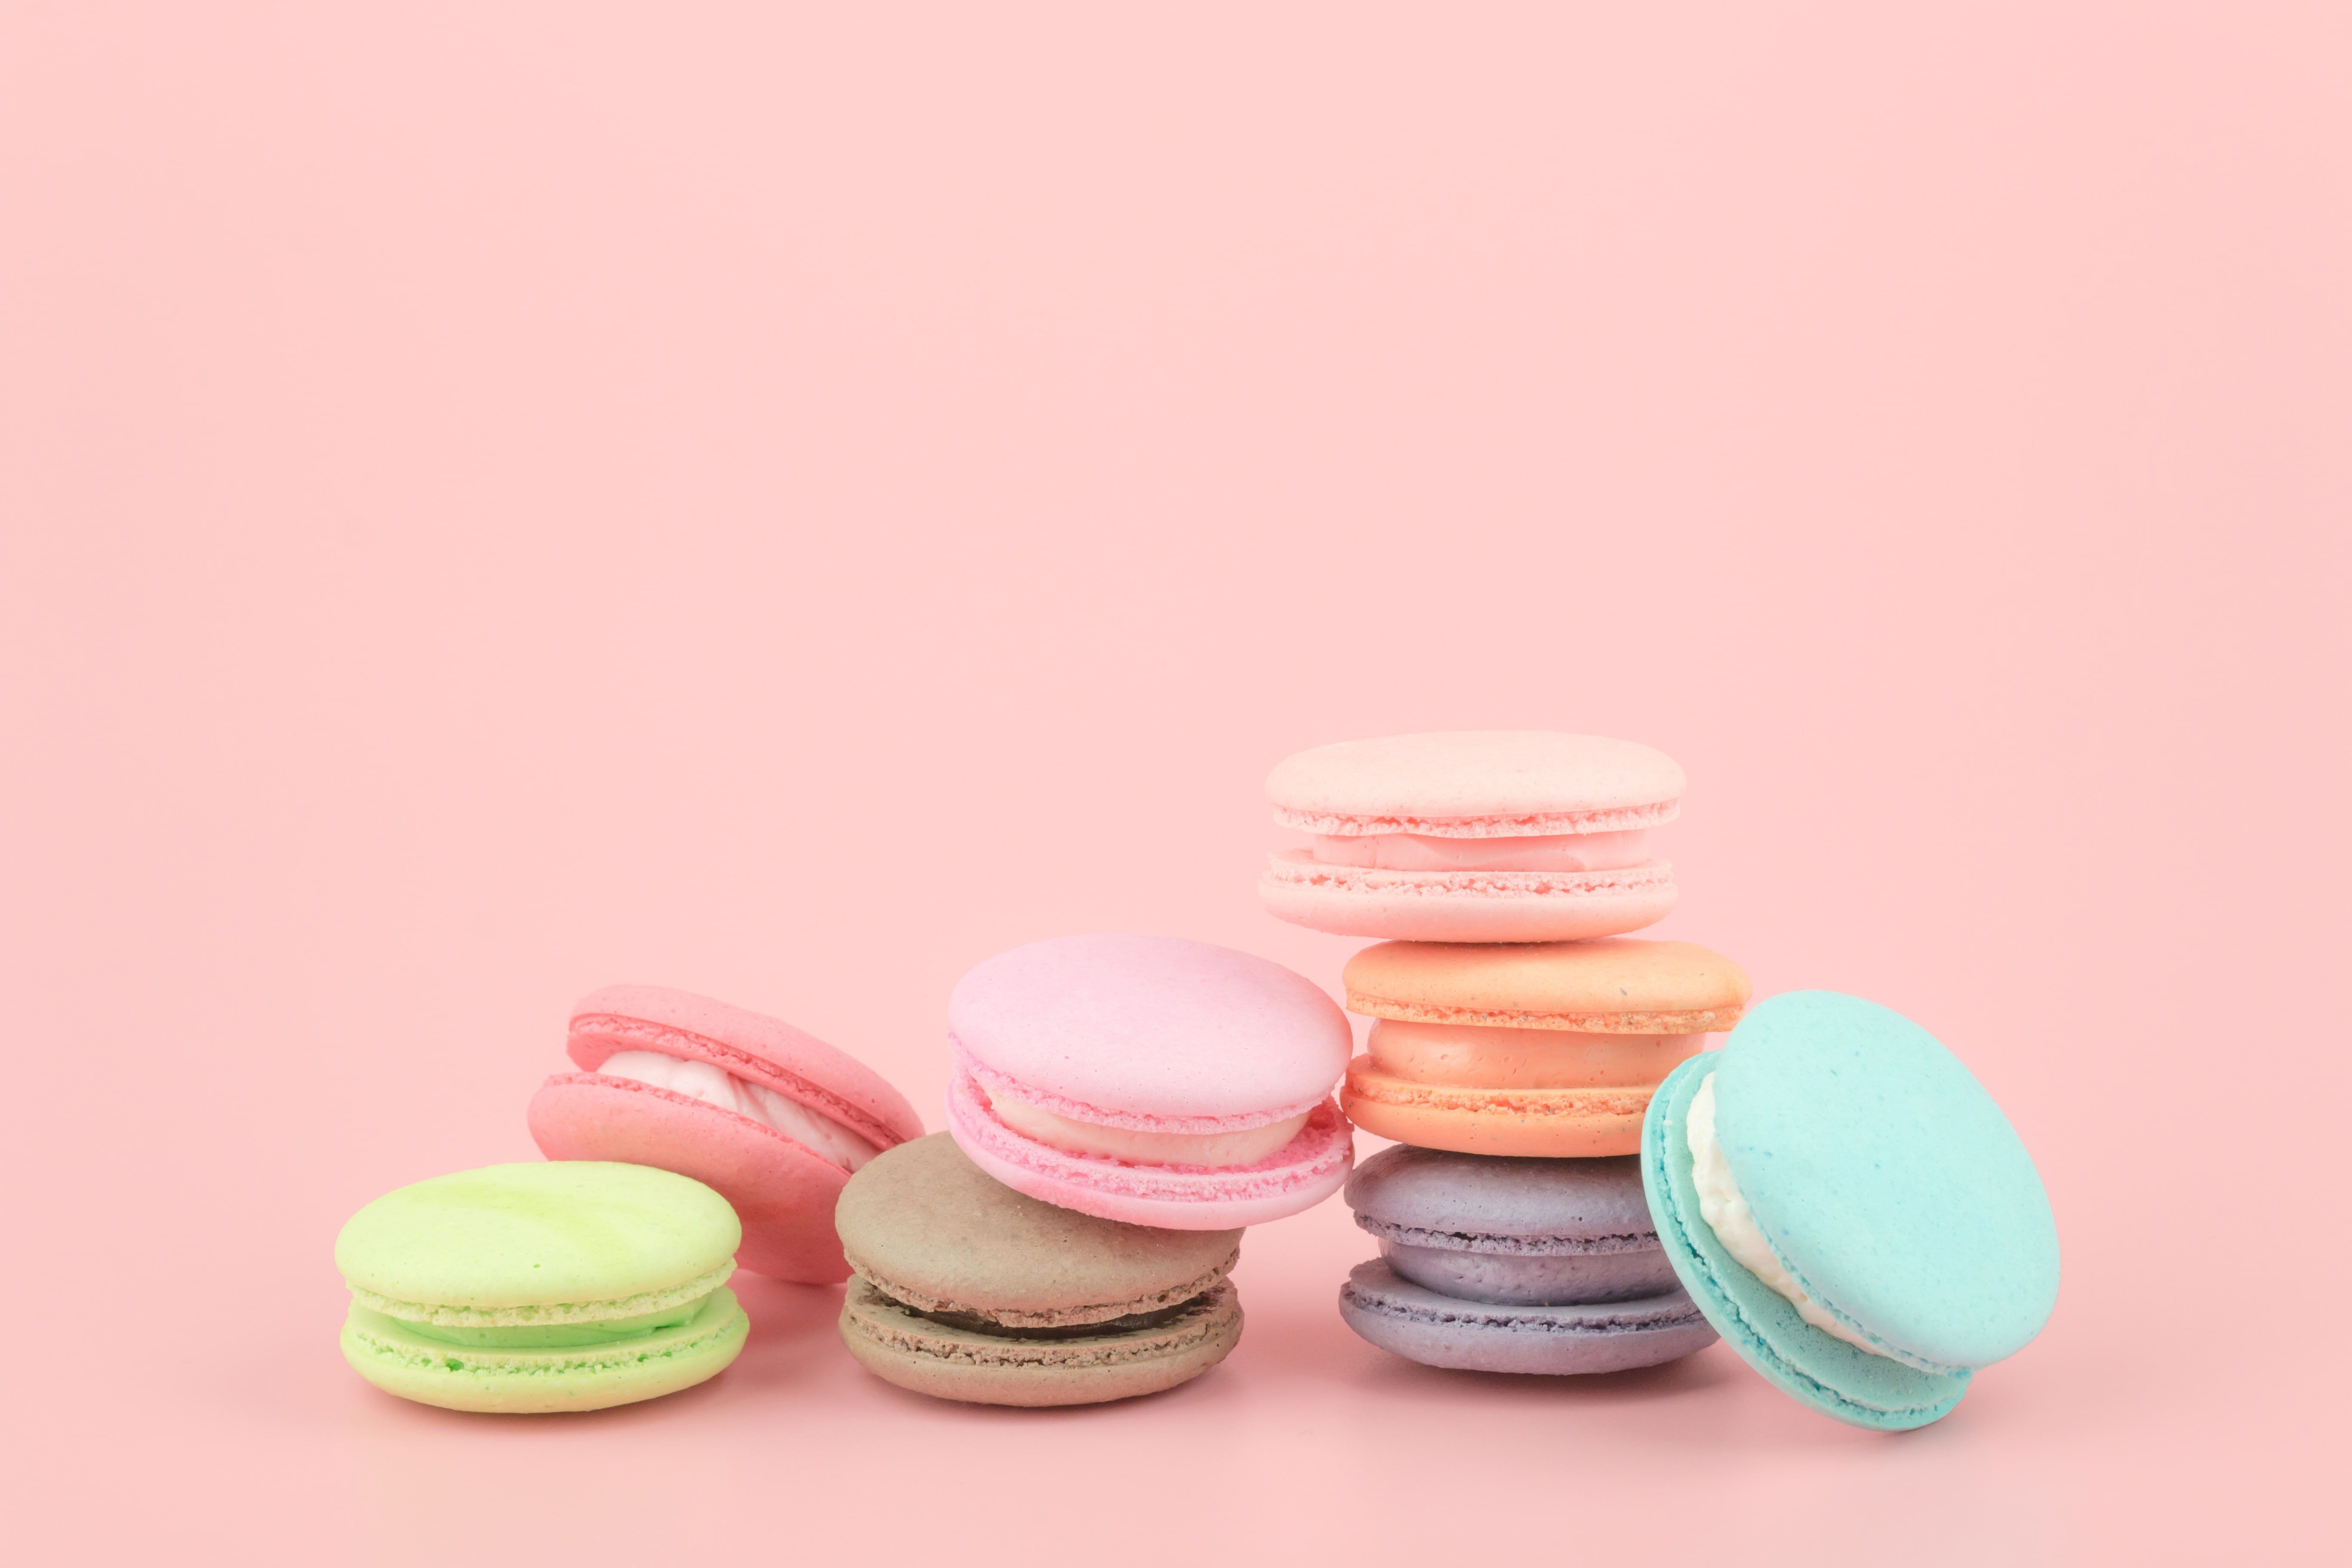 A pile of seven macarons in varying shades of pink, blue, and green. - Macarons